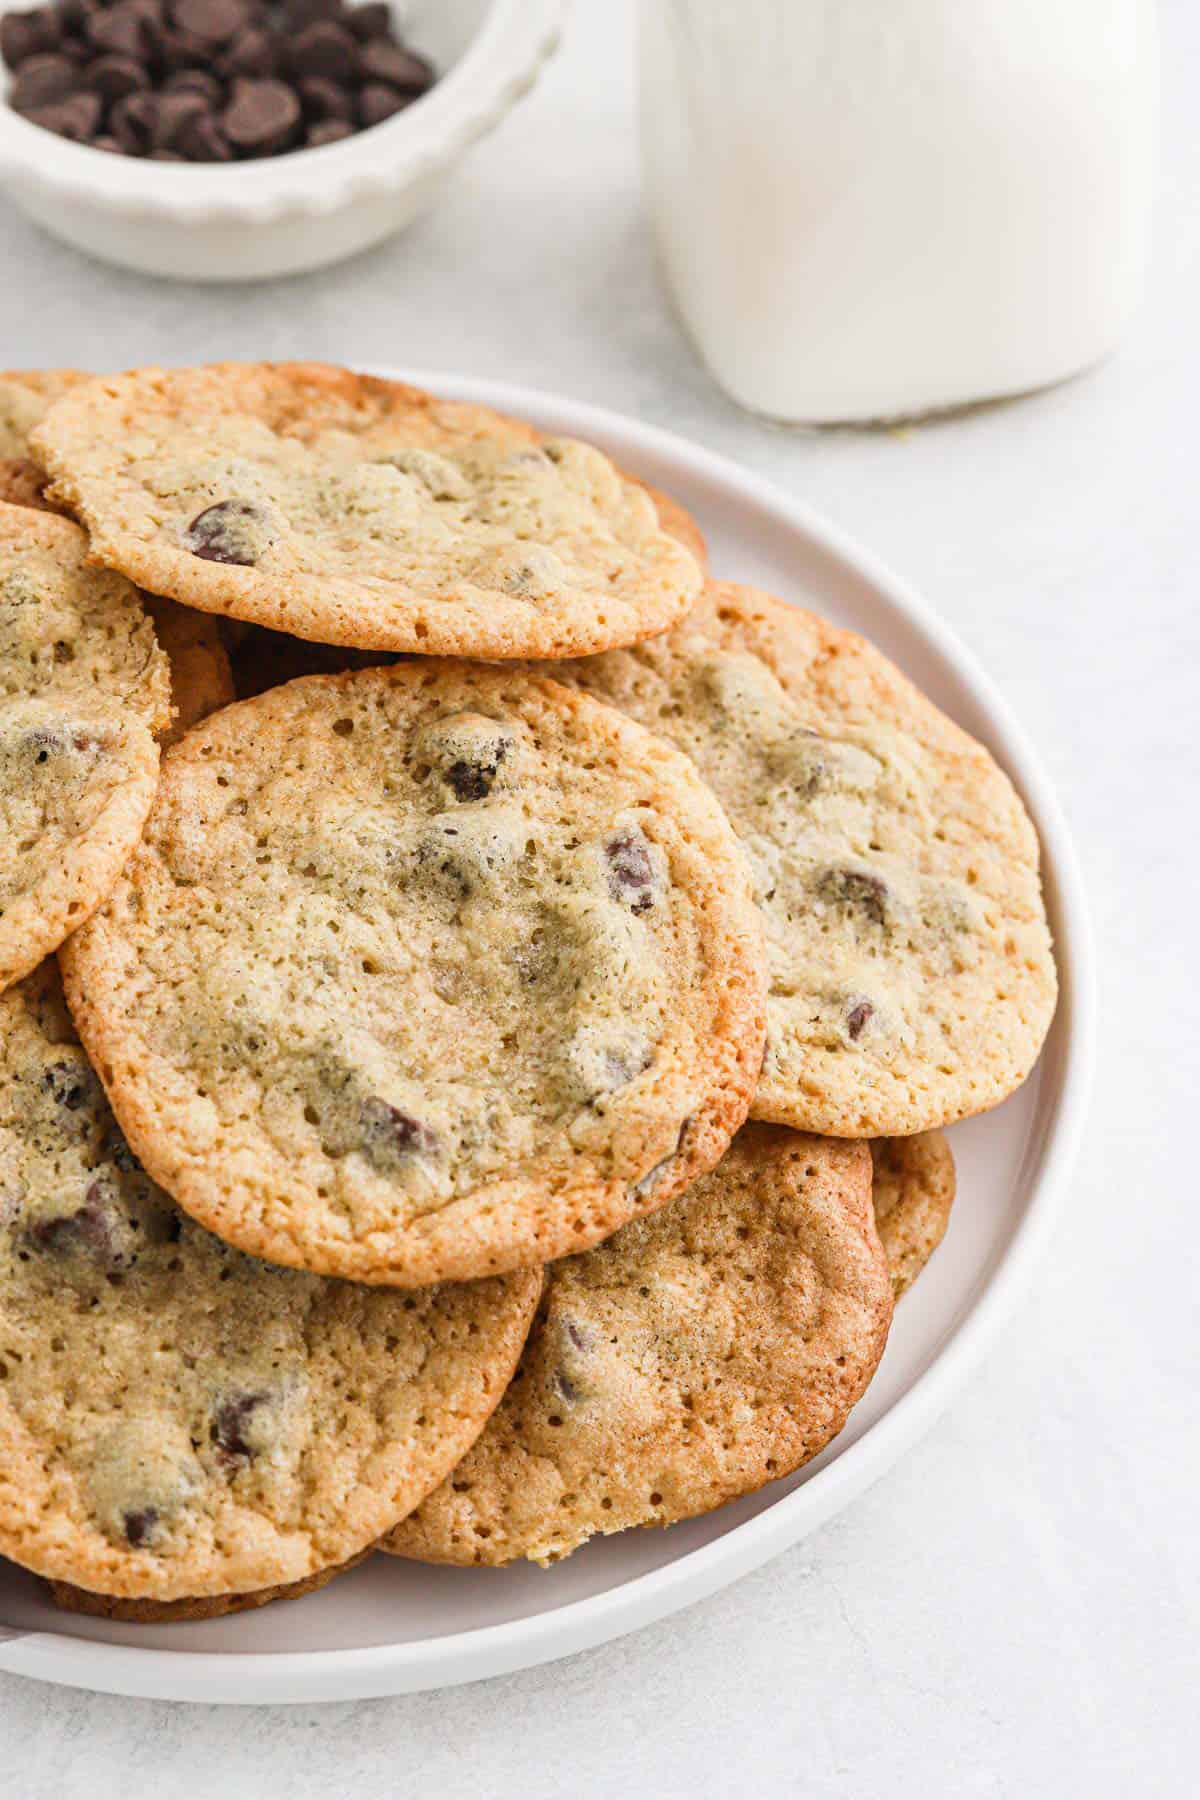 A plate of crispy and thin chocolate chip cookies on the table in front of a jar of milk and a bowl of chocolate chips.